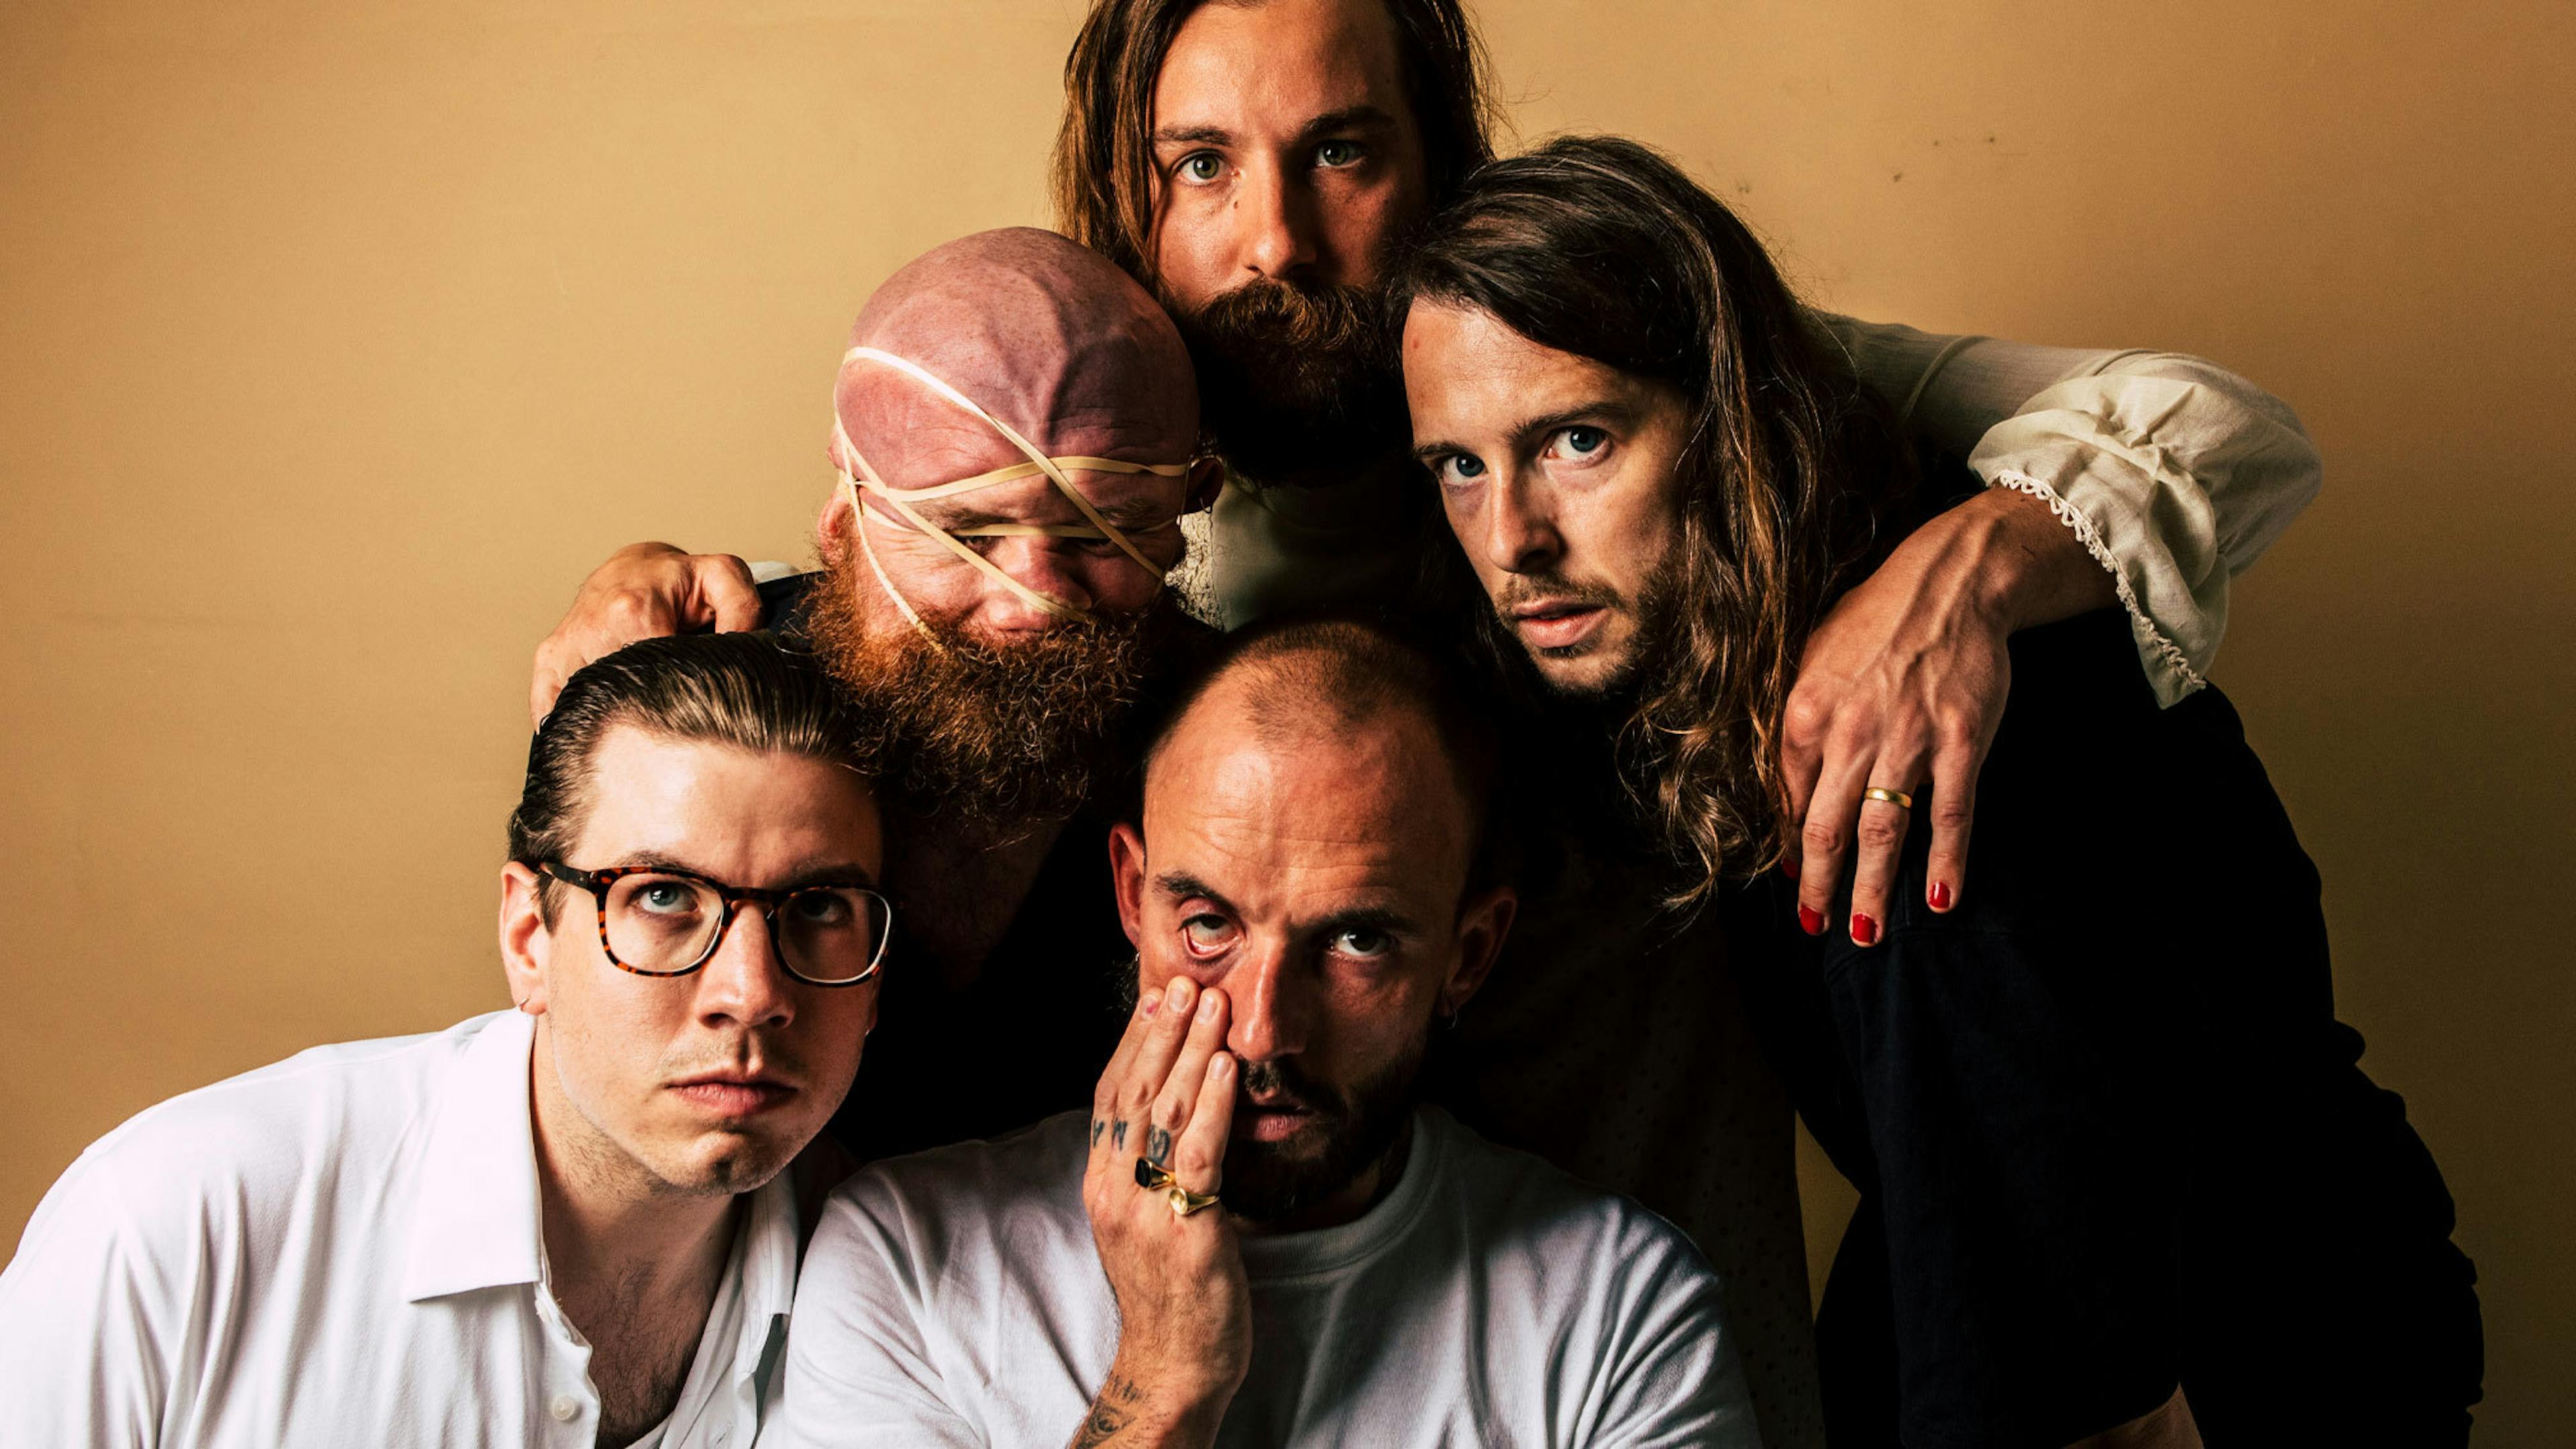 IDLES announce biggest U.S. tour to date Kerrang!